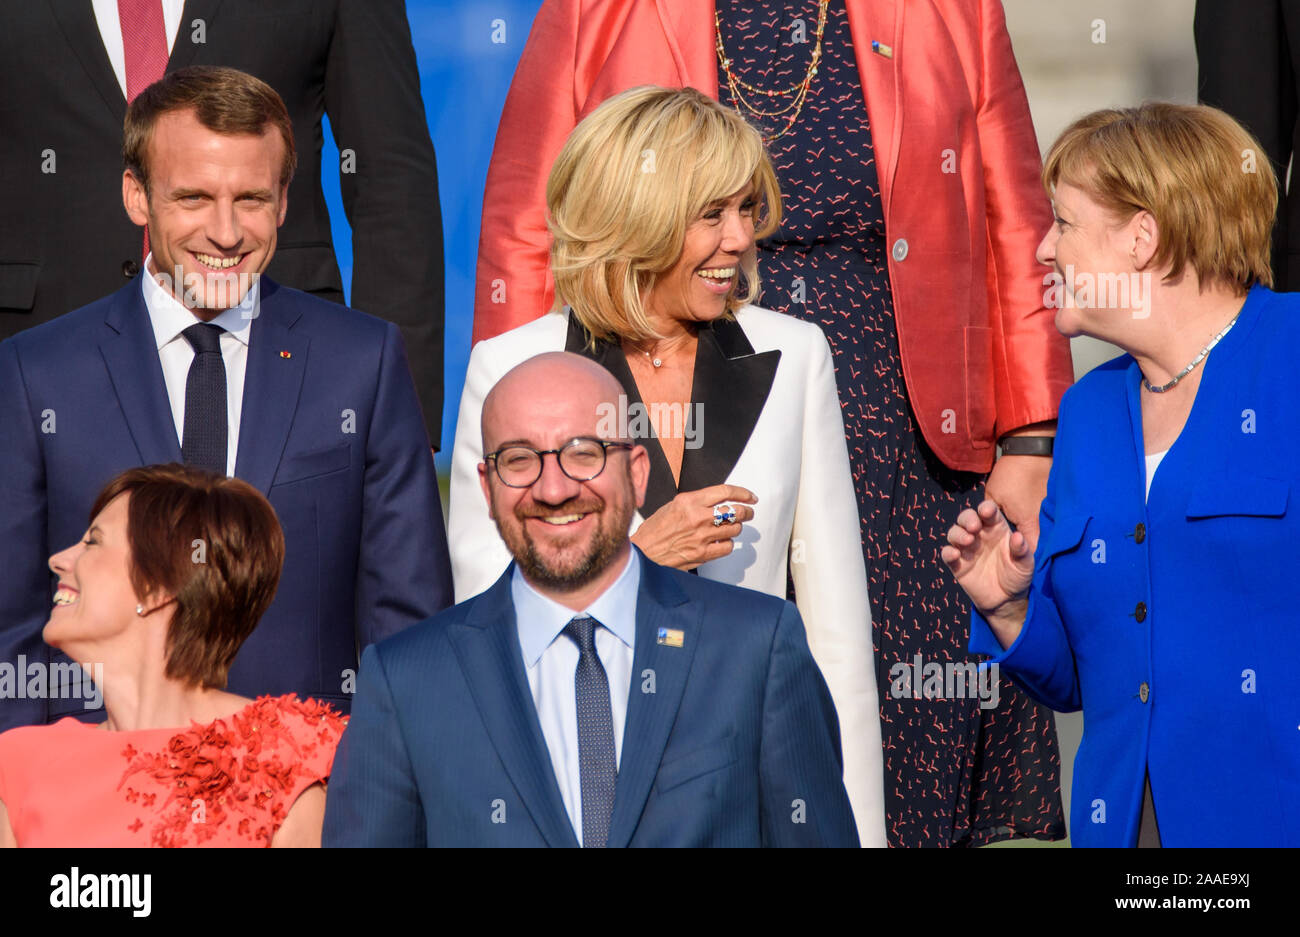 11.07.2018. BRUSSELS, BELGIUM. Emmanuel Macron, President of France (L),  Brigitte Macron, First lady of France (C) and Angela Merkel (R), Chancellor of Germany. World leaders arrives for Working dinner, during NATO (North Atlantic Treaty Organization) SUMMIT 2018 Stock Photo